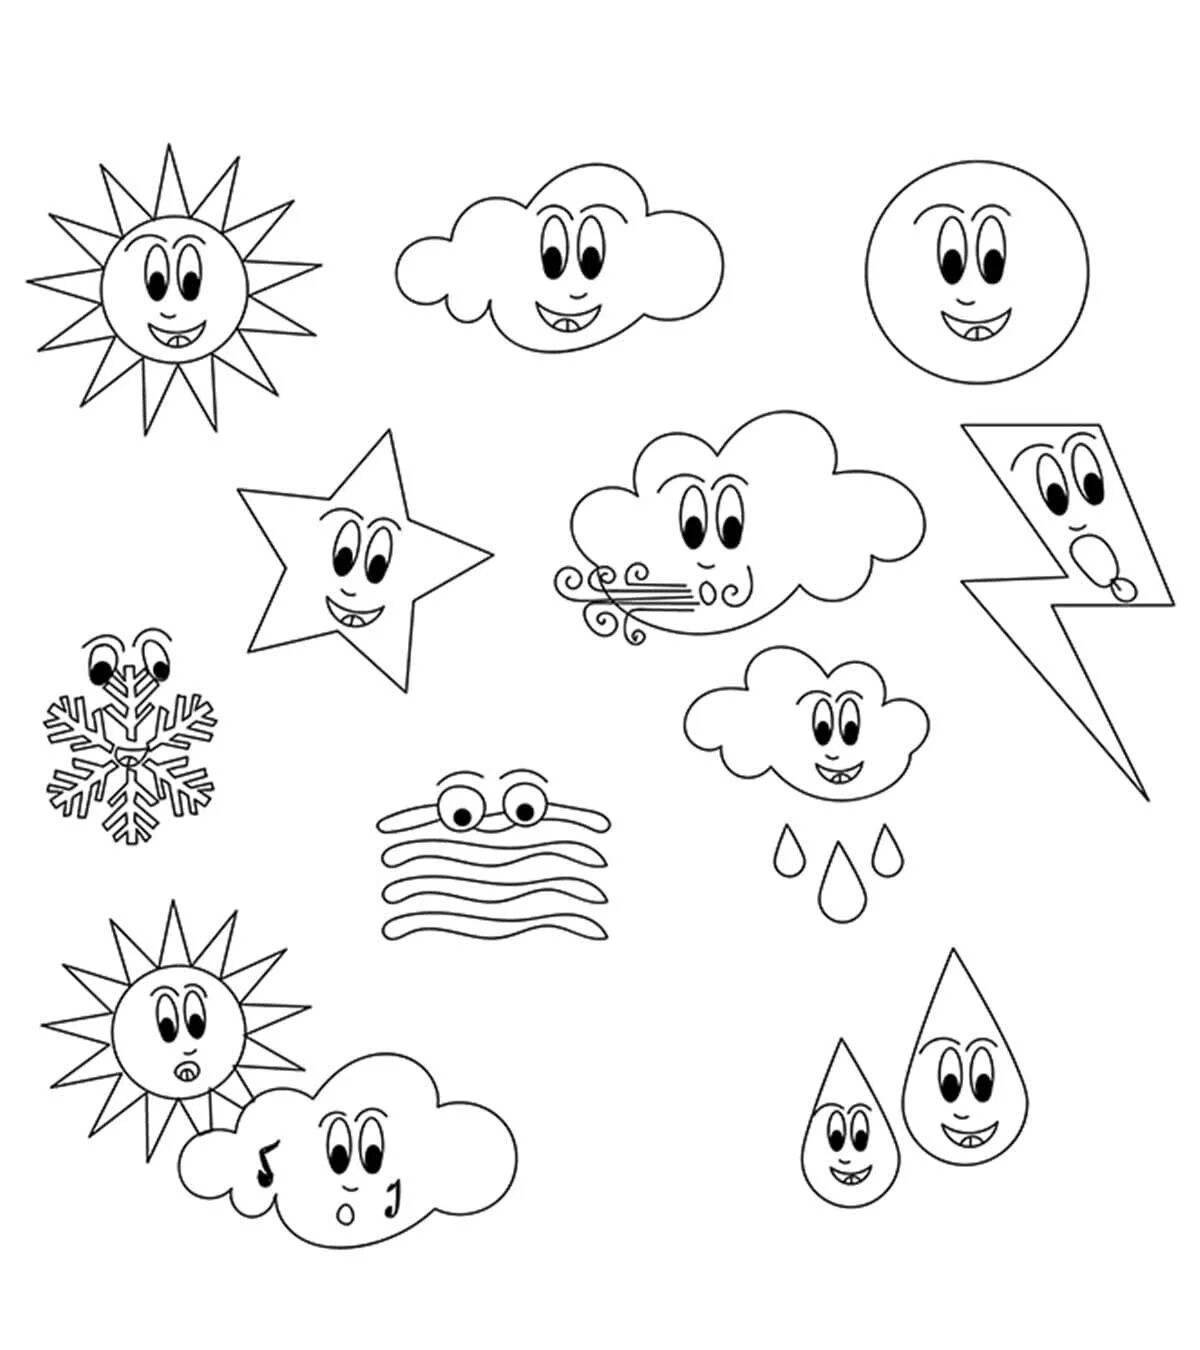 Exciting weather coloring for kids